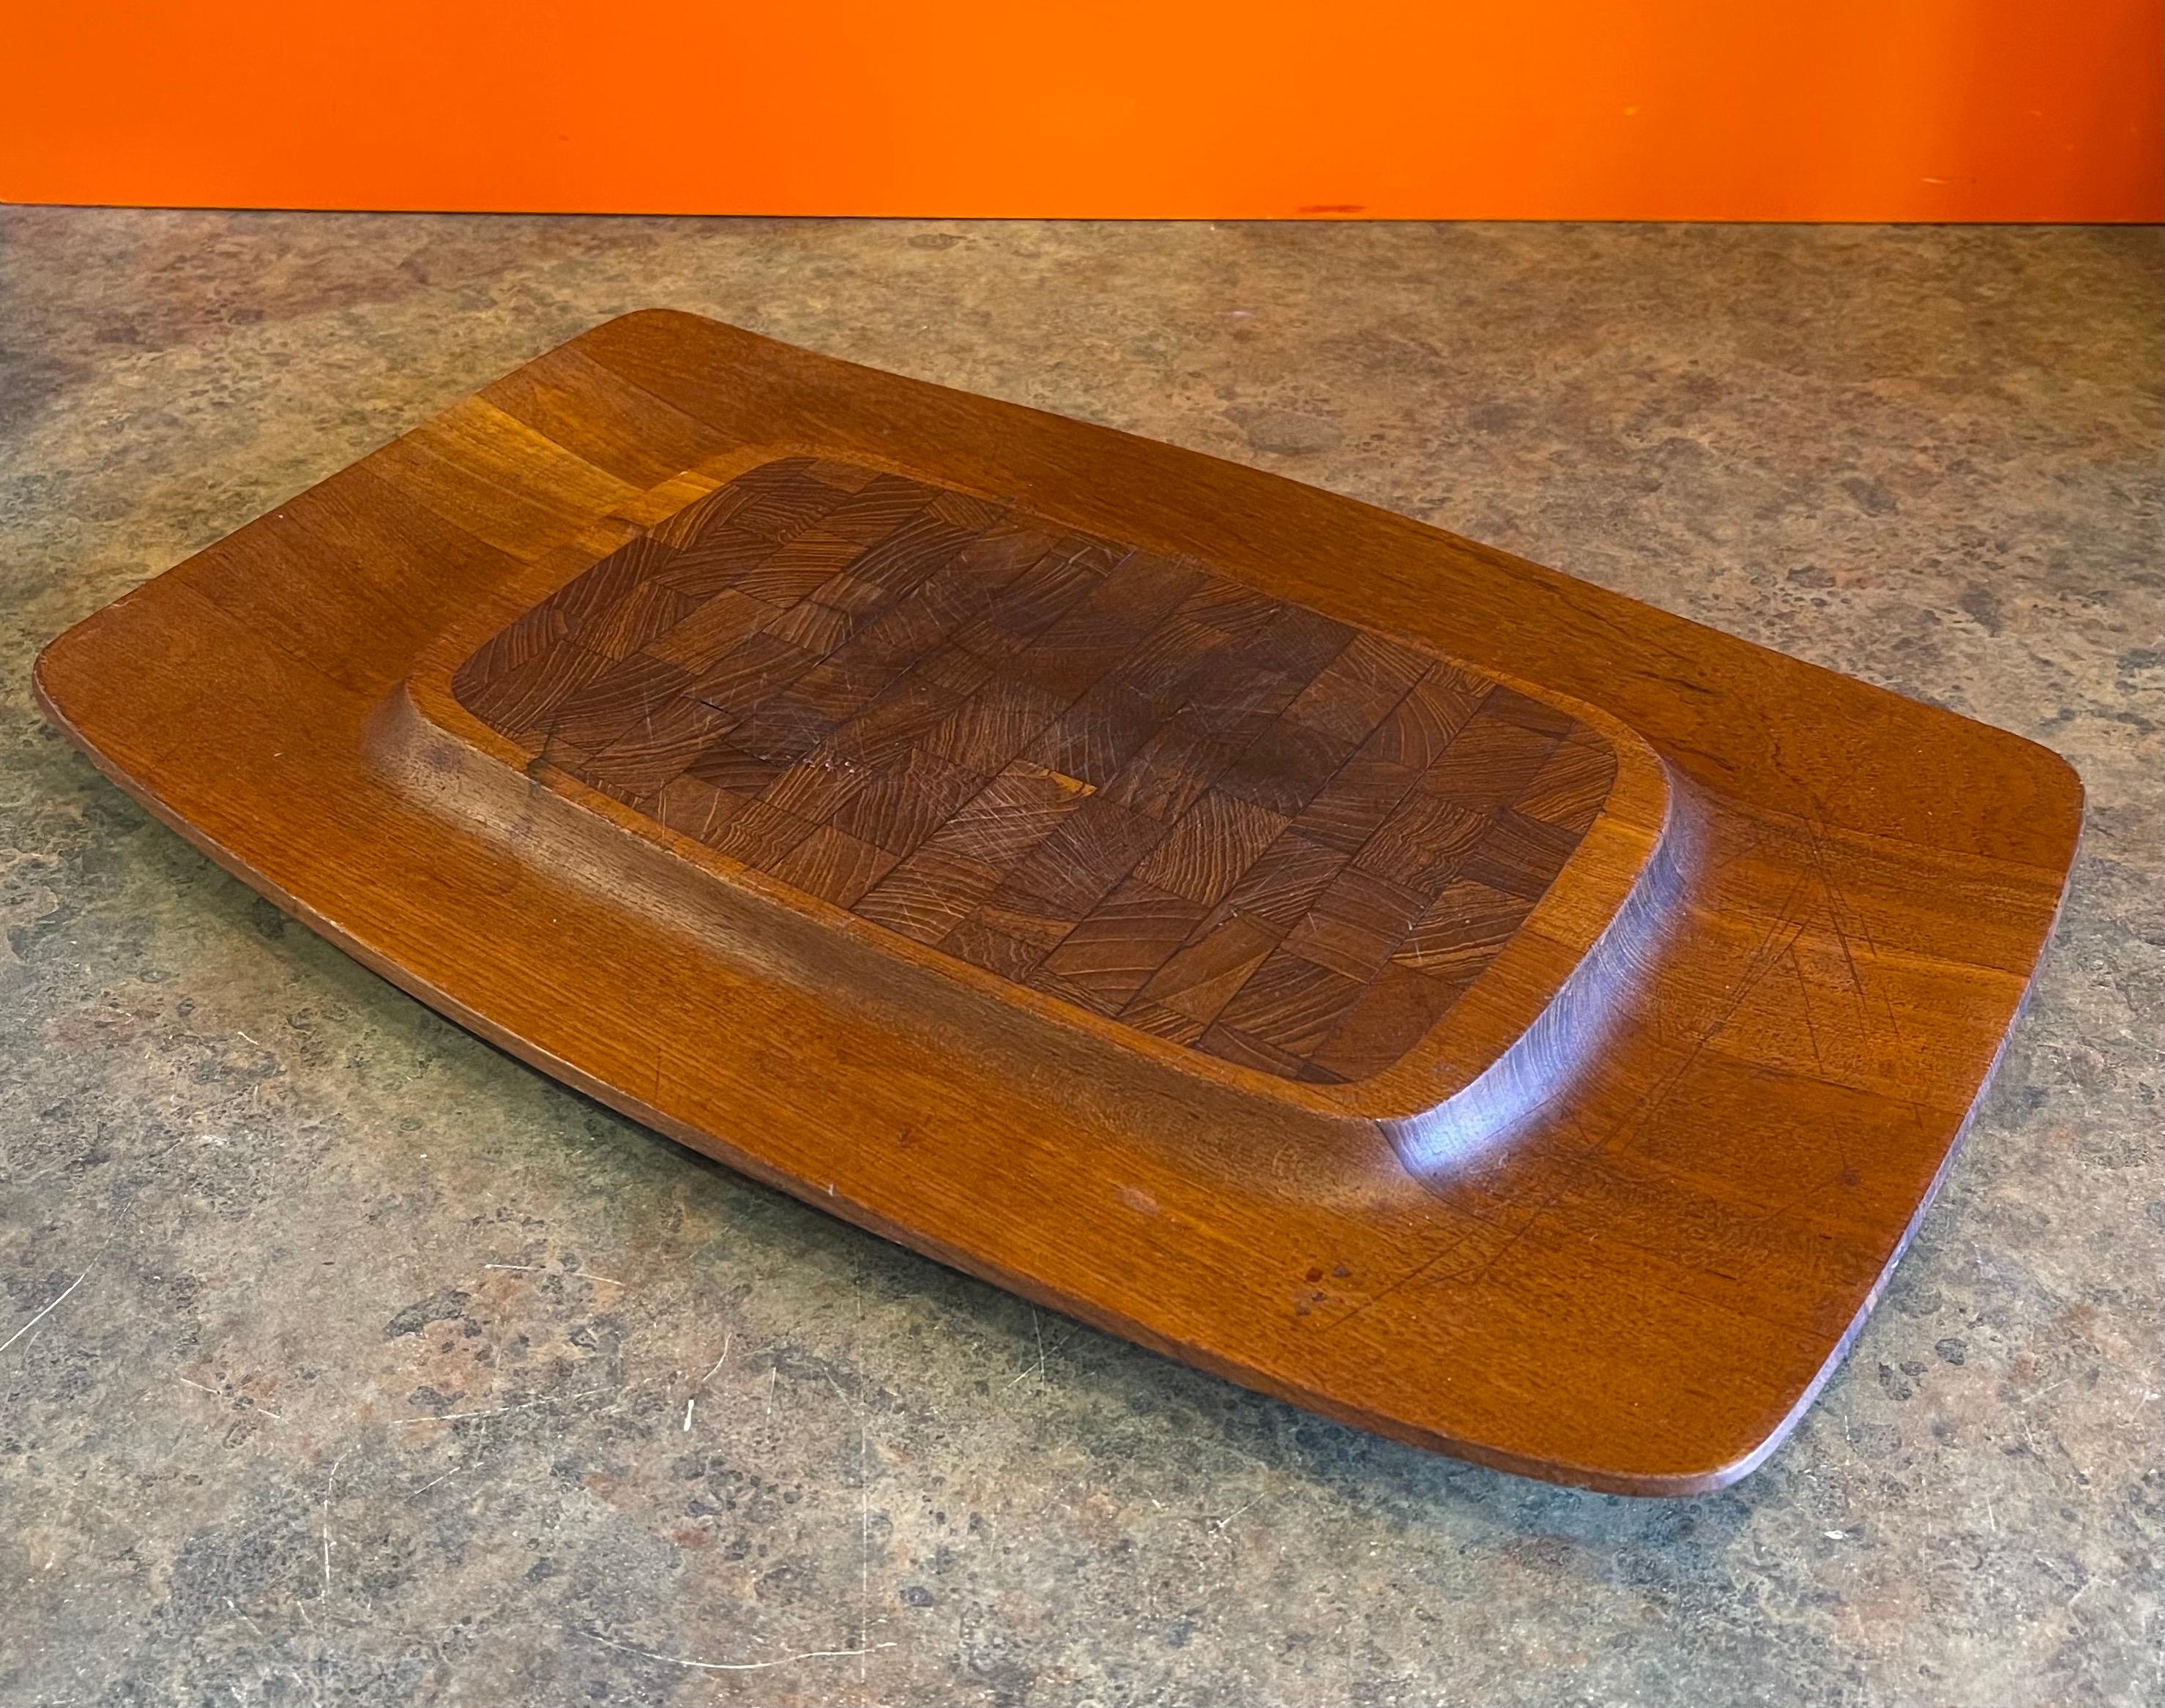 Danish modern teak butcher block cutting board / cheese tray by Jens Quistgaard for Dansk, circa 1960s. The piece is in good vintage condition and measures 19